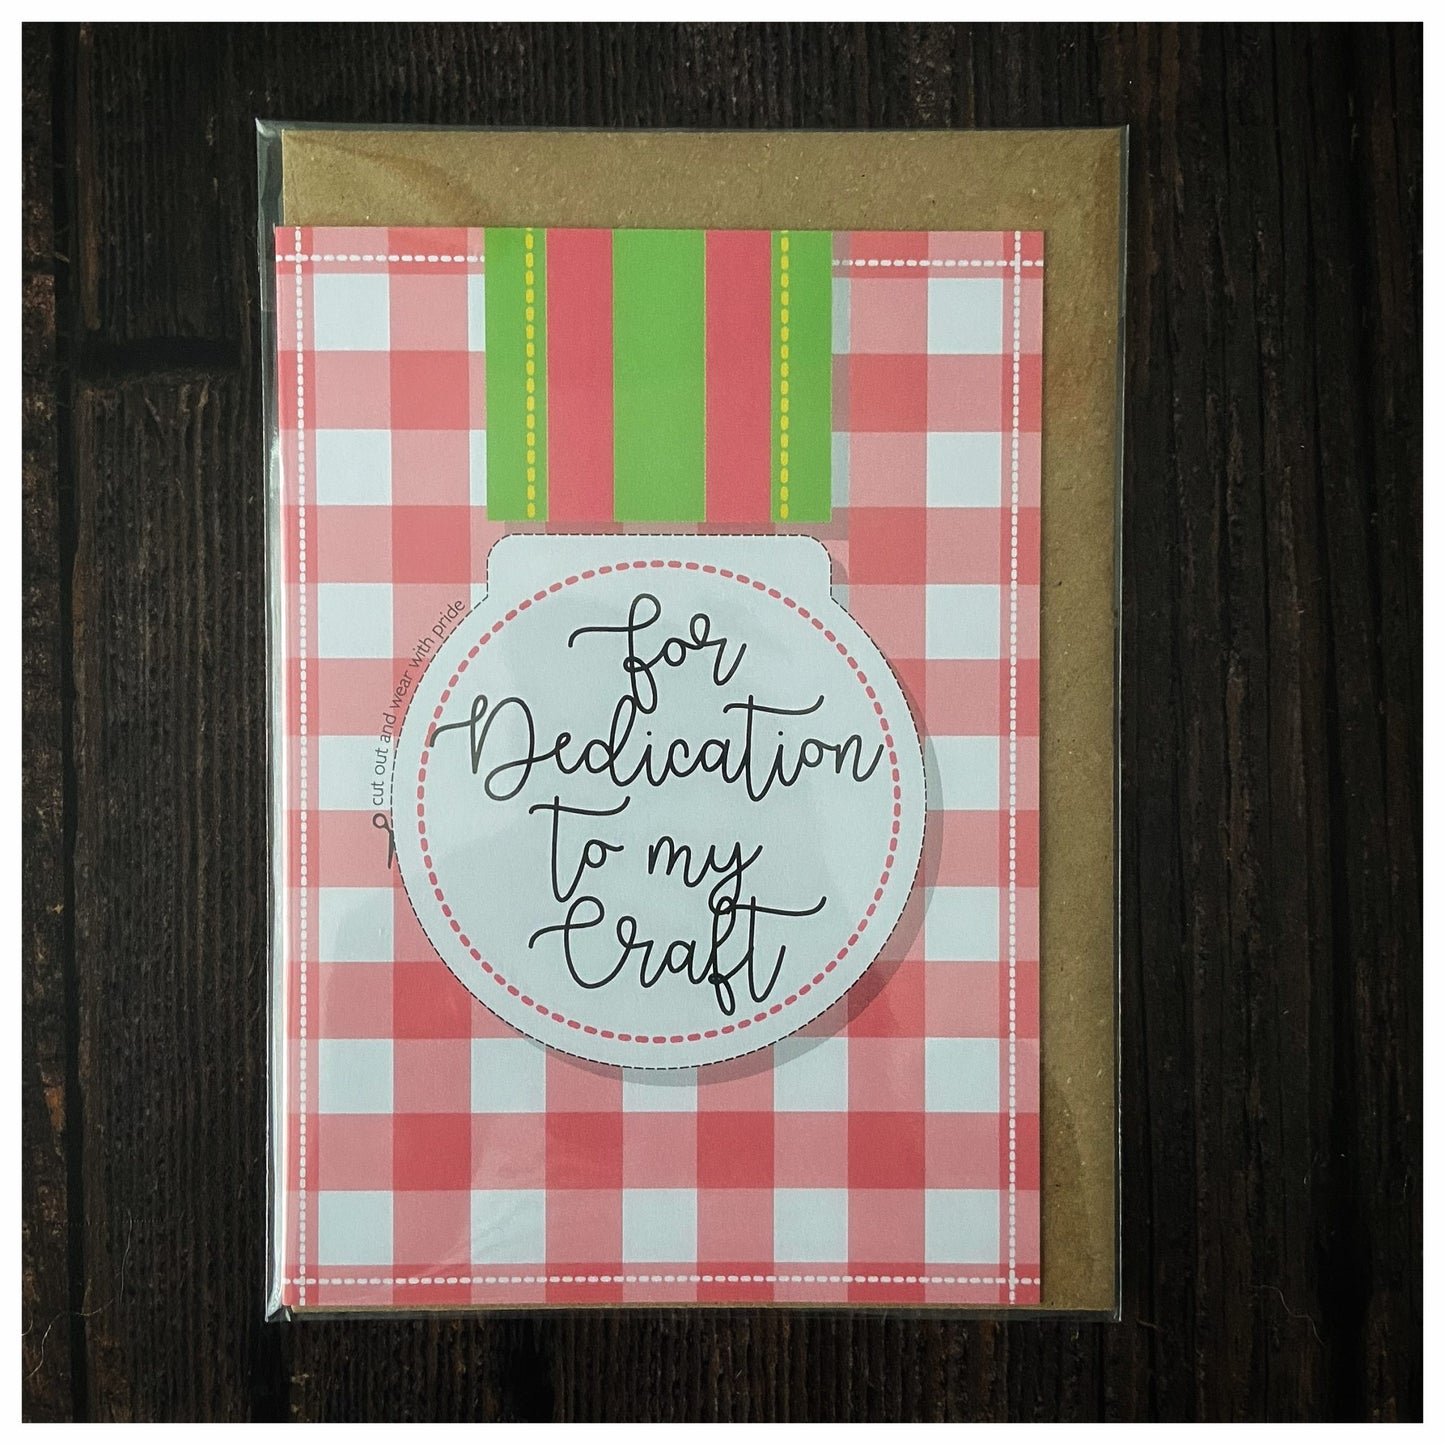 "For Dedication to my Craft" Card by Tilly Flop Designs